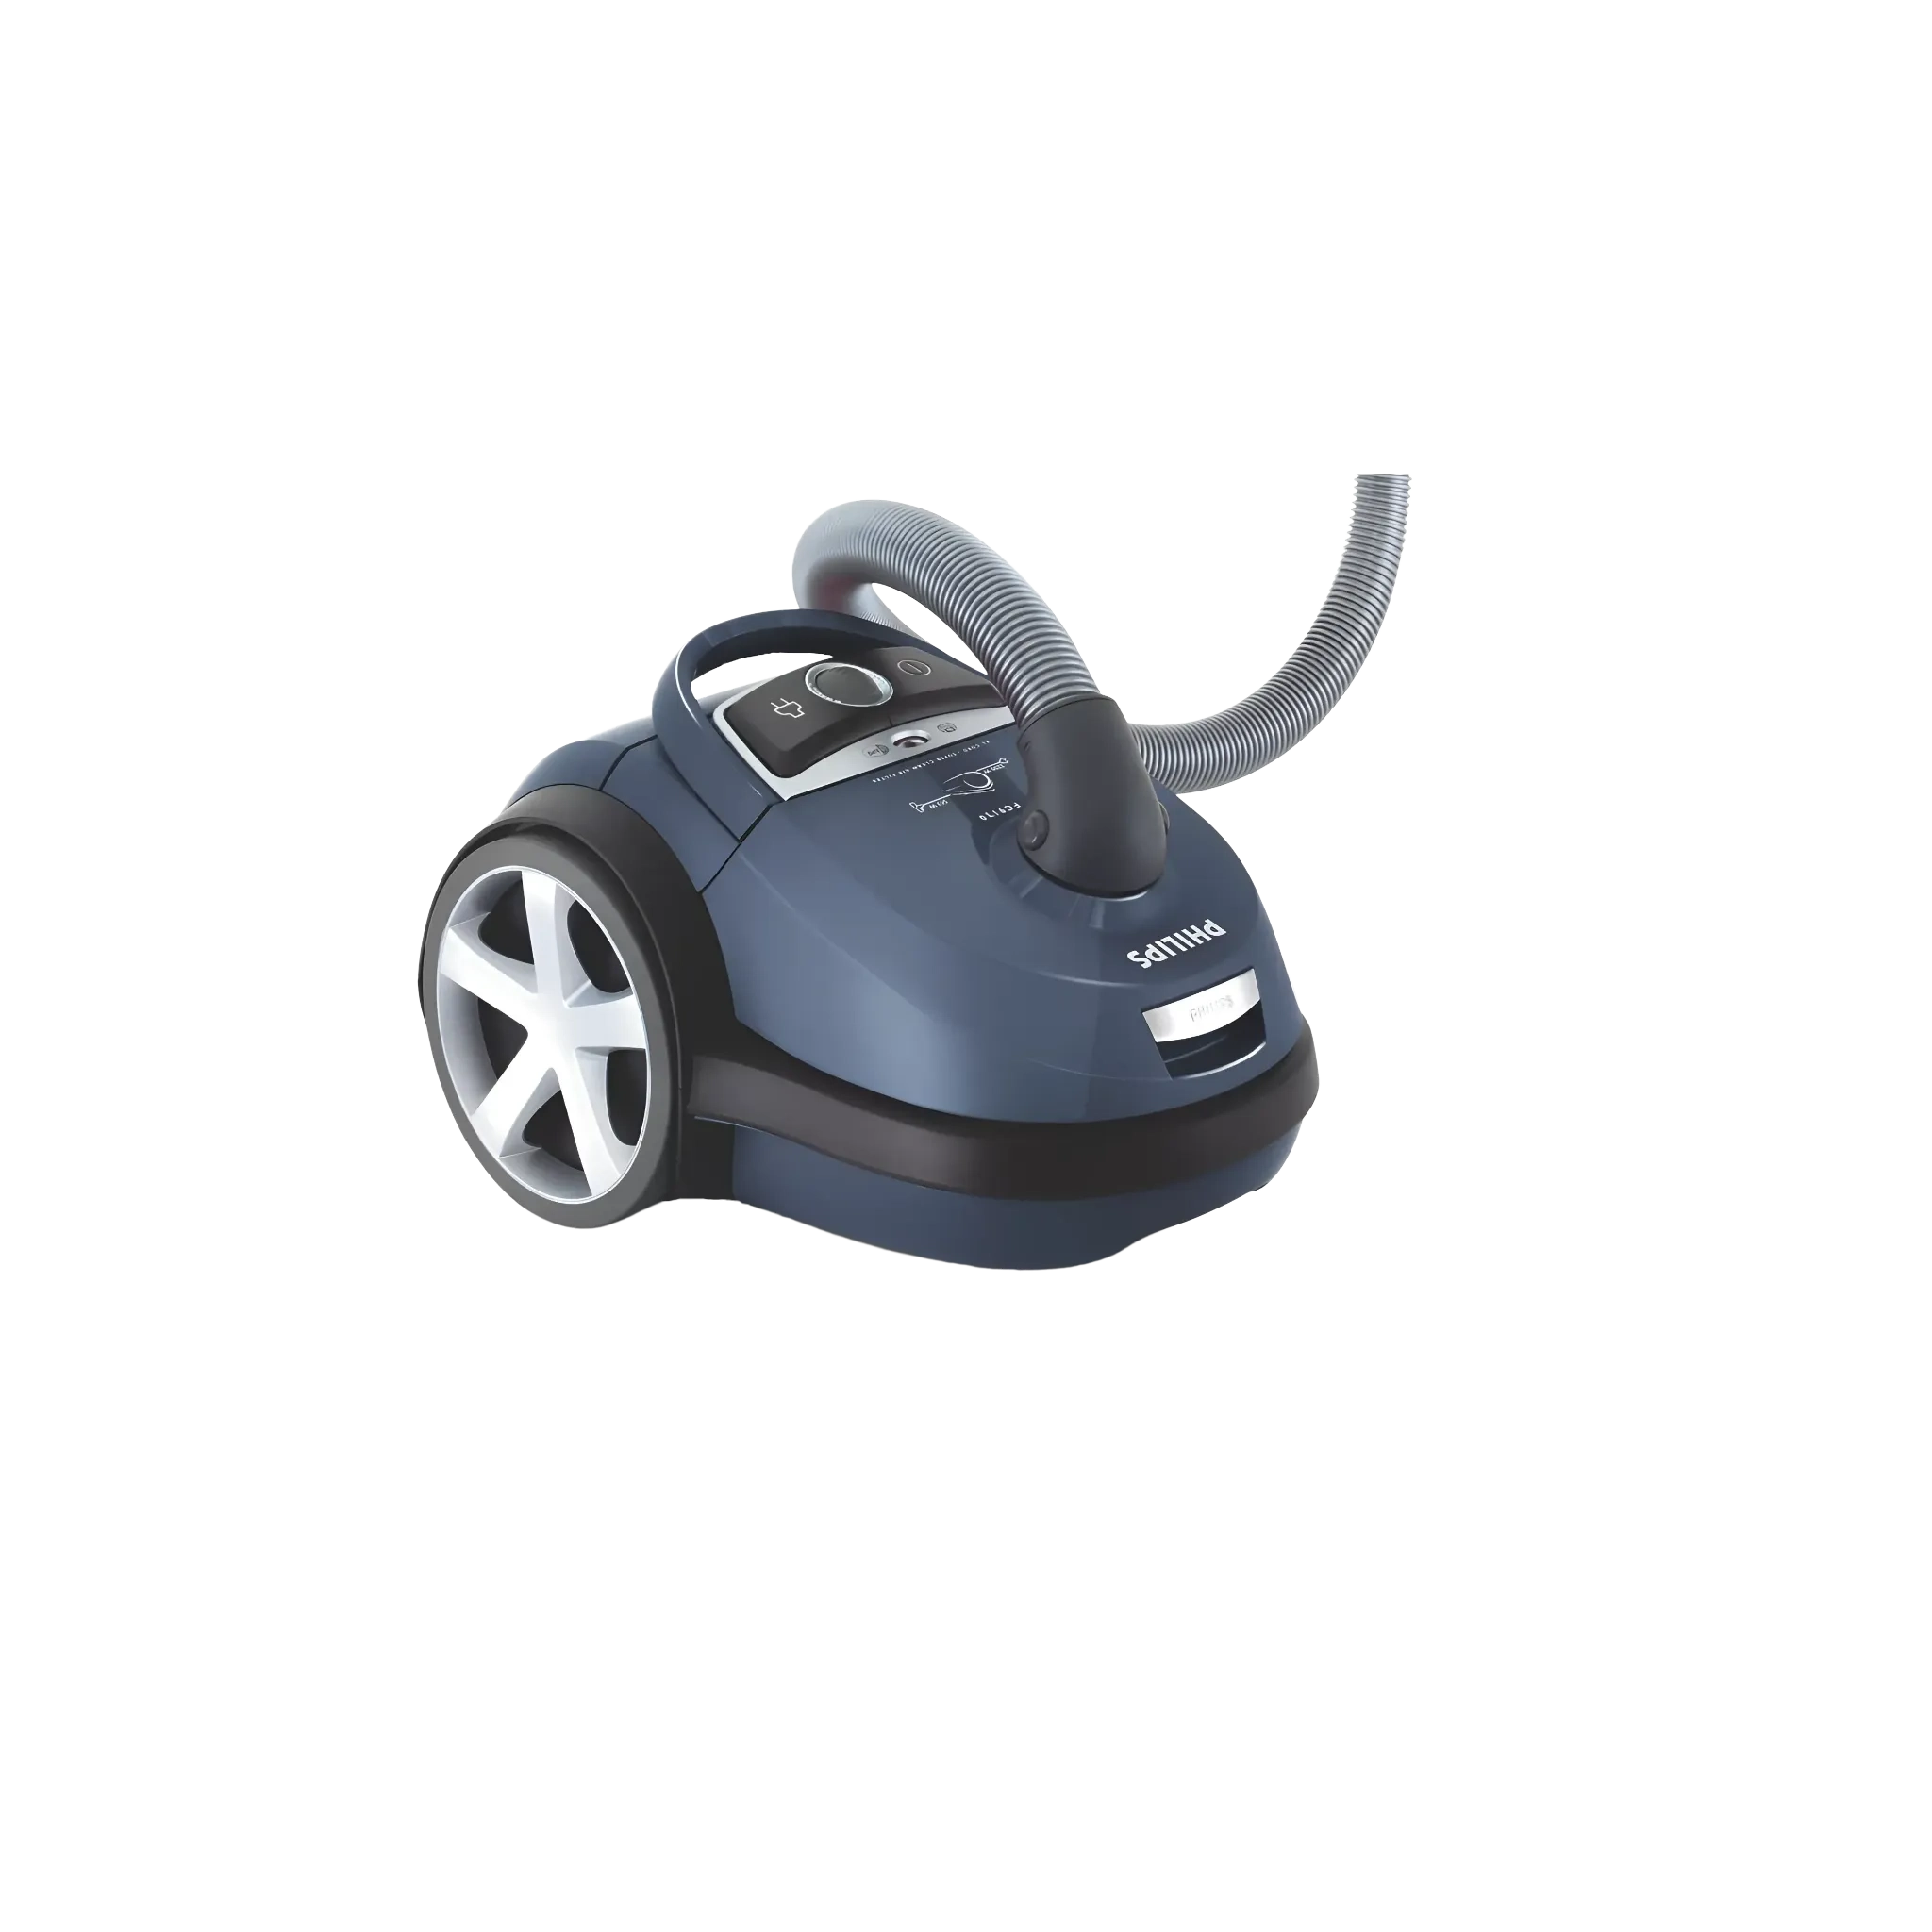 Philips Performer Vacuum Cleaner With Bag Fc9170/01